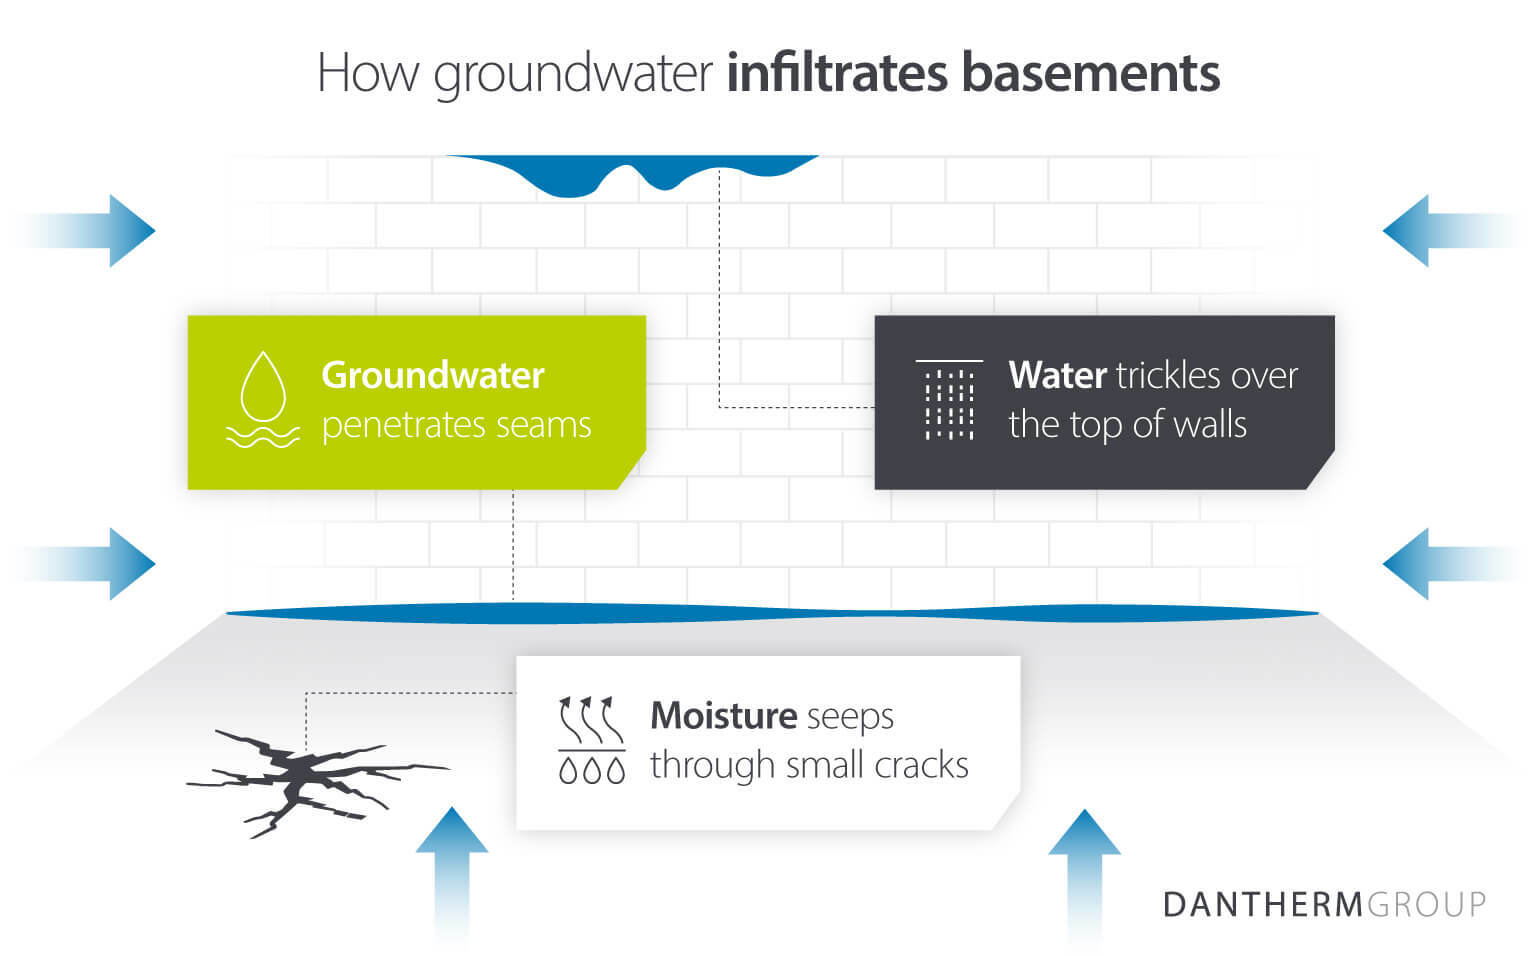 Infographic demonstrating how groundwater infiltrates basements in buildings to cause damp